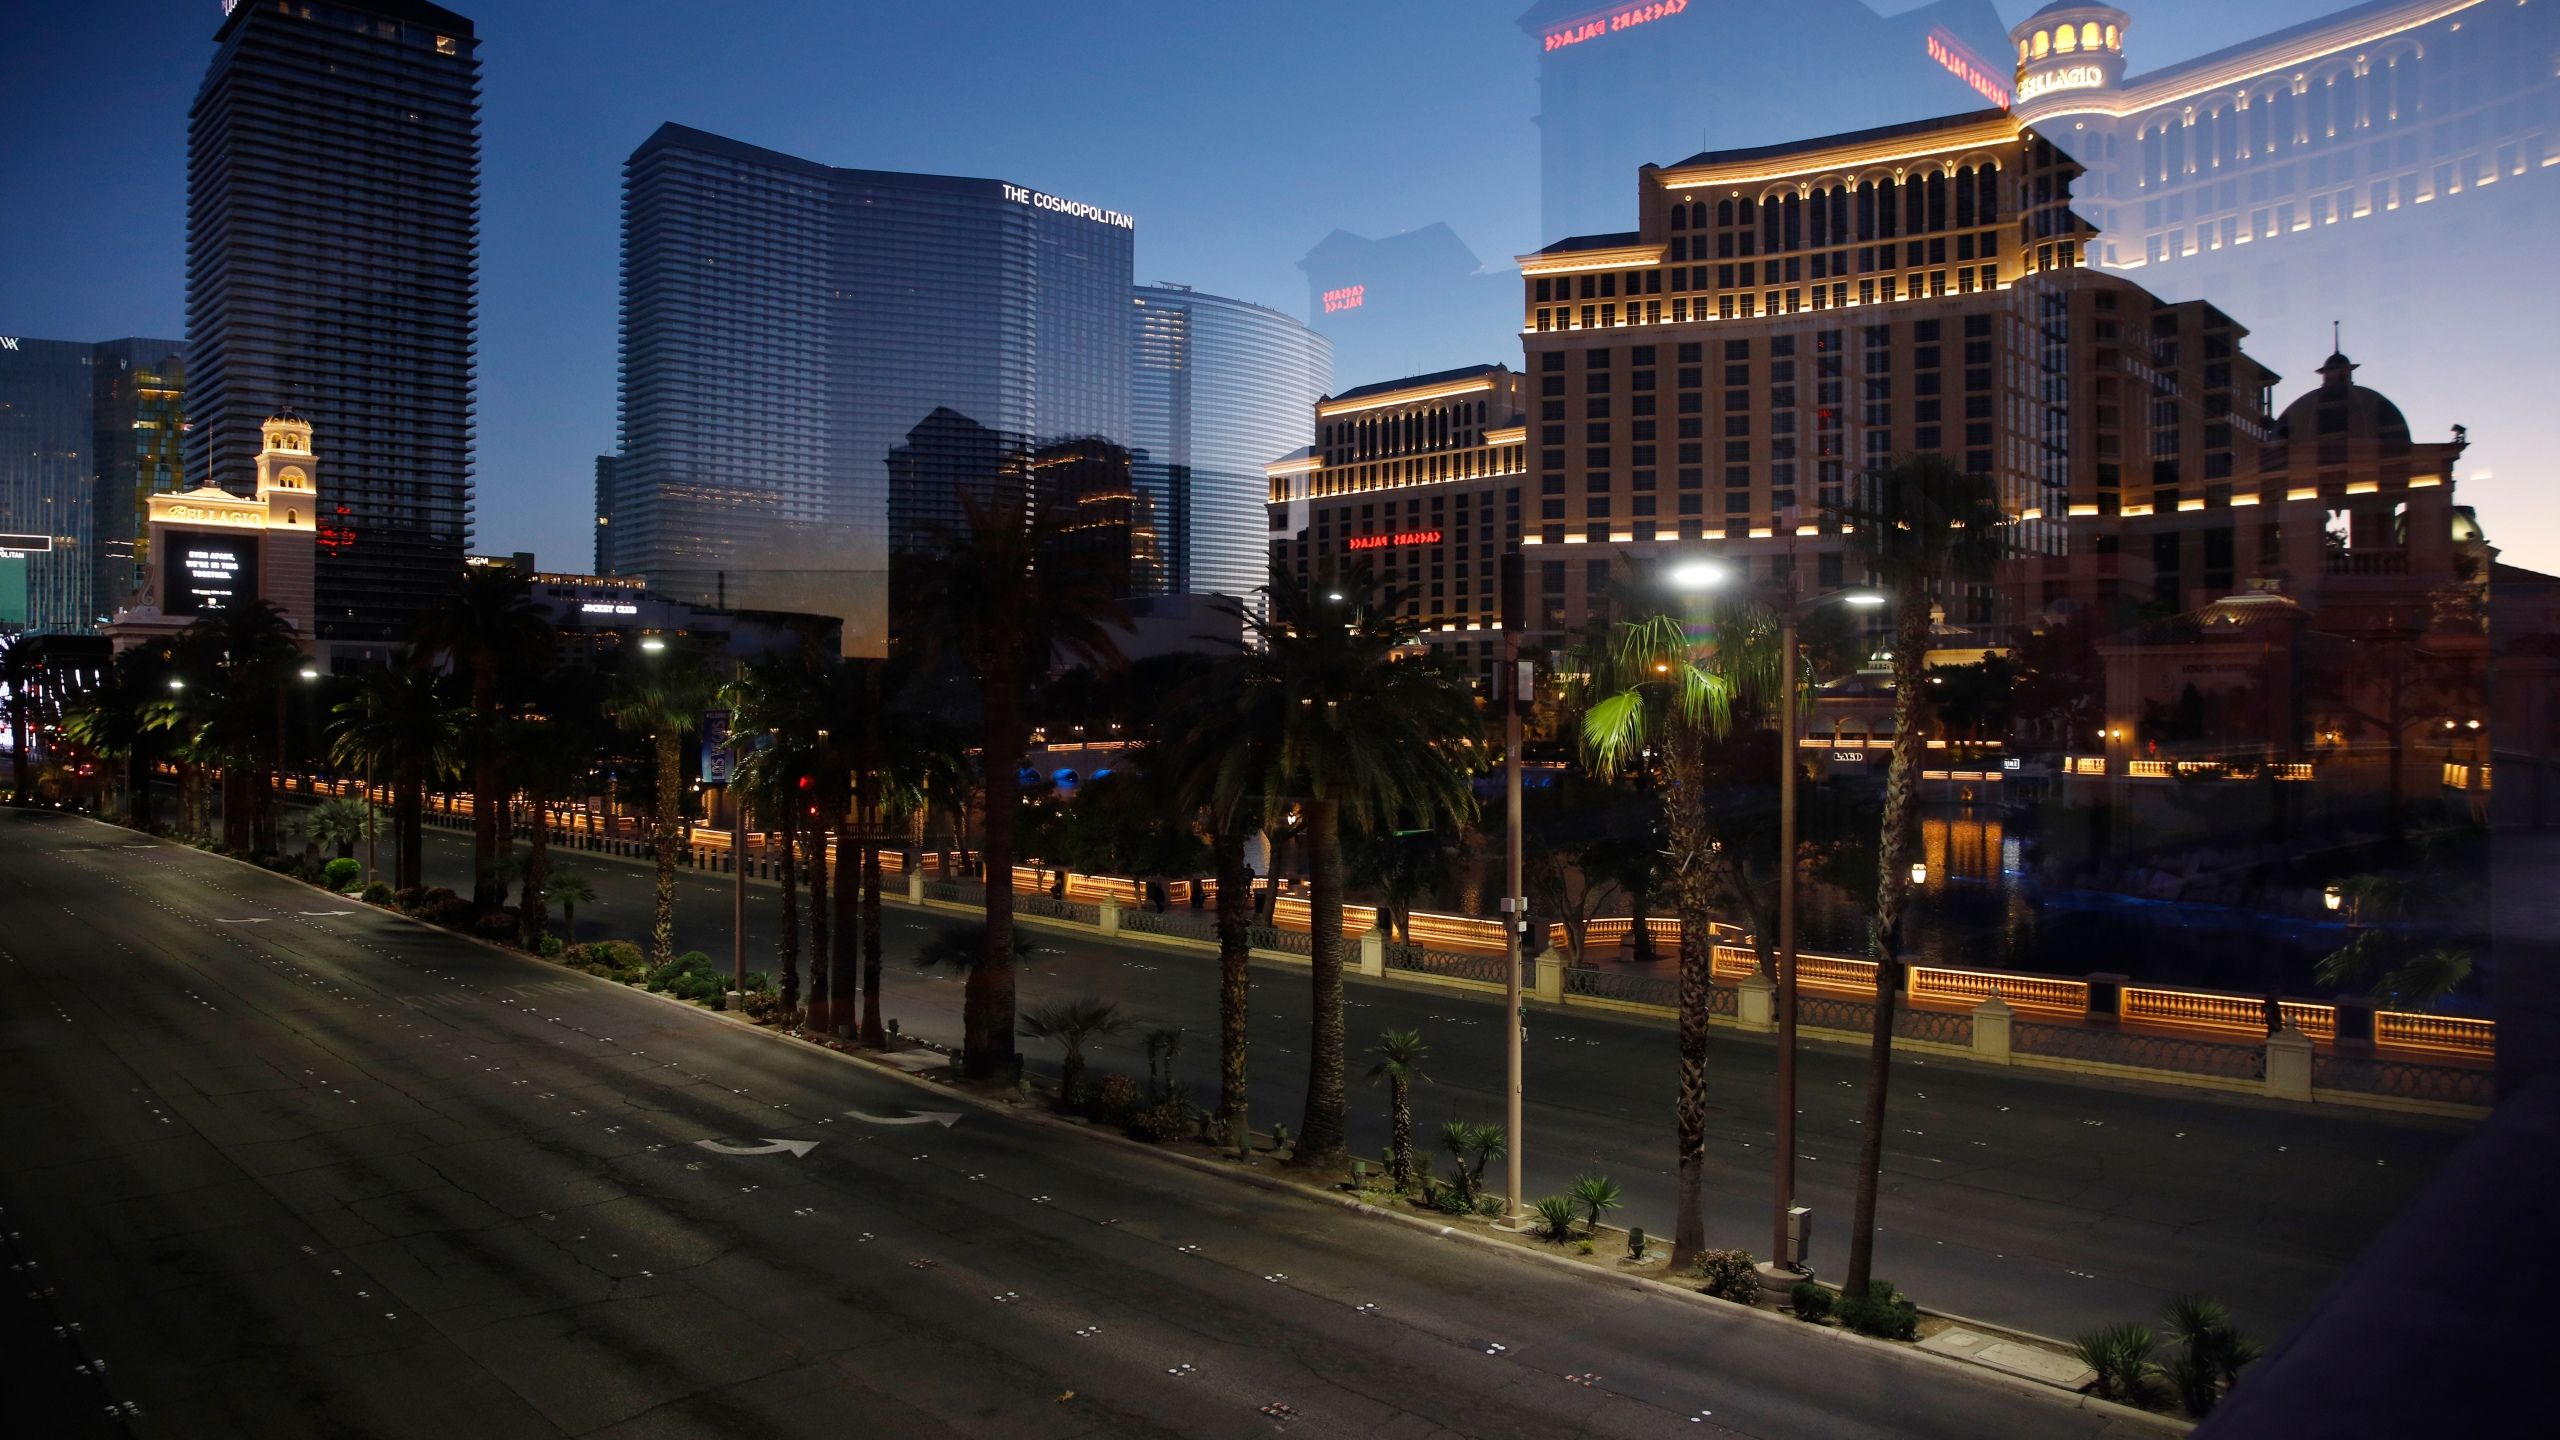 A city street with palm trees and buildings - Las Vegas